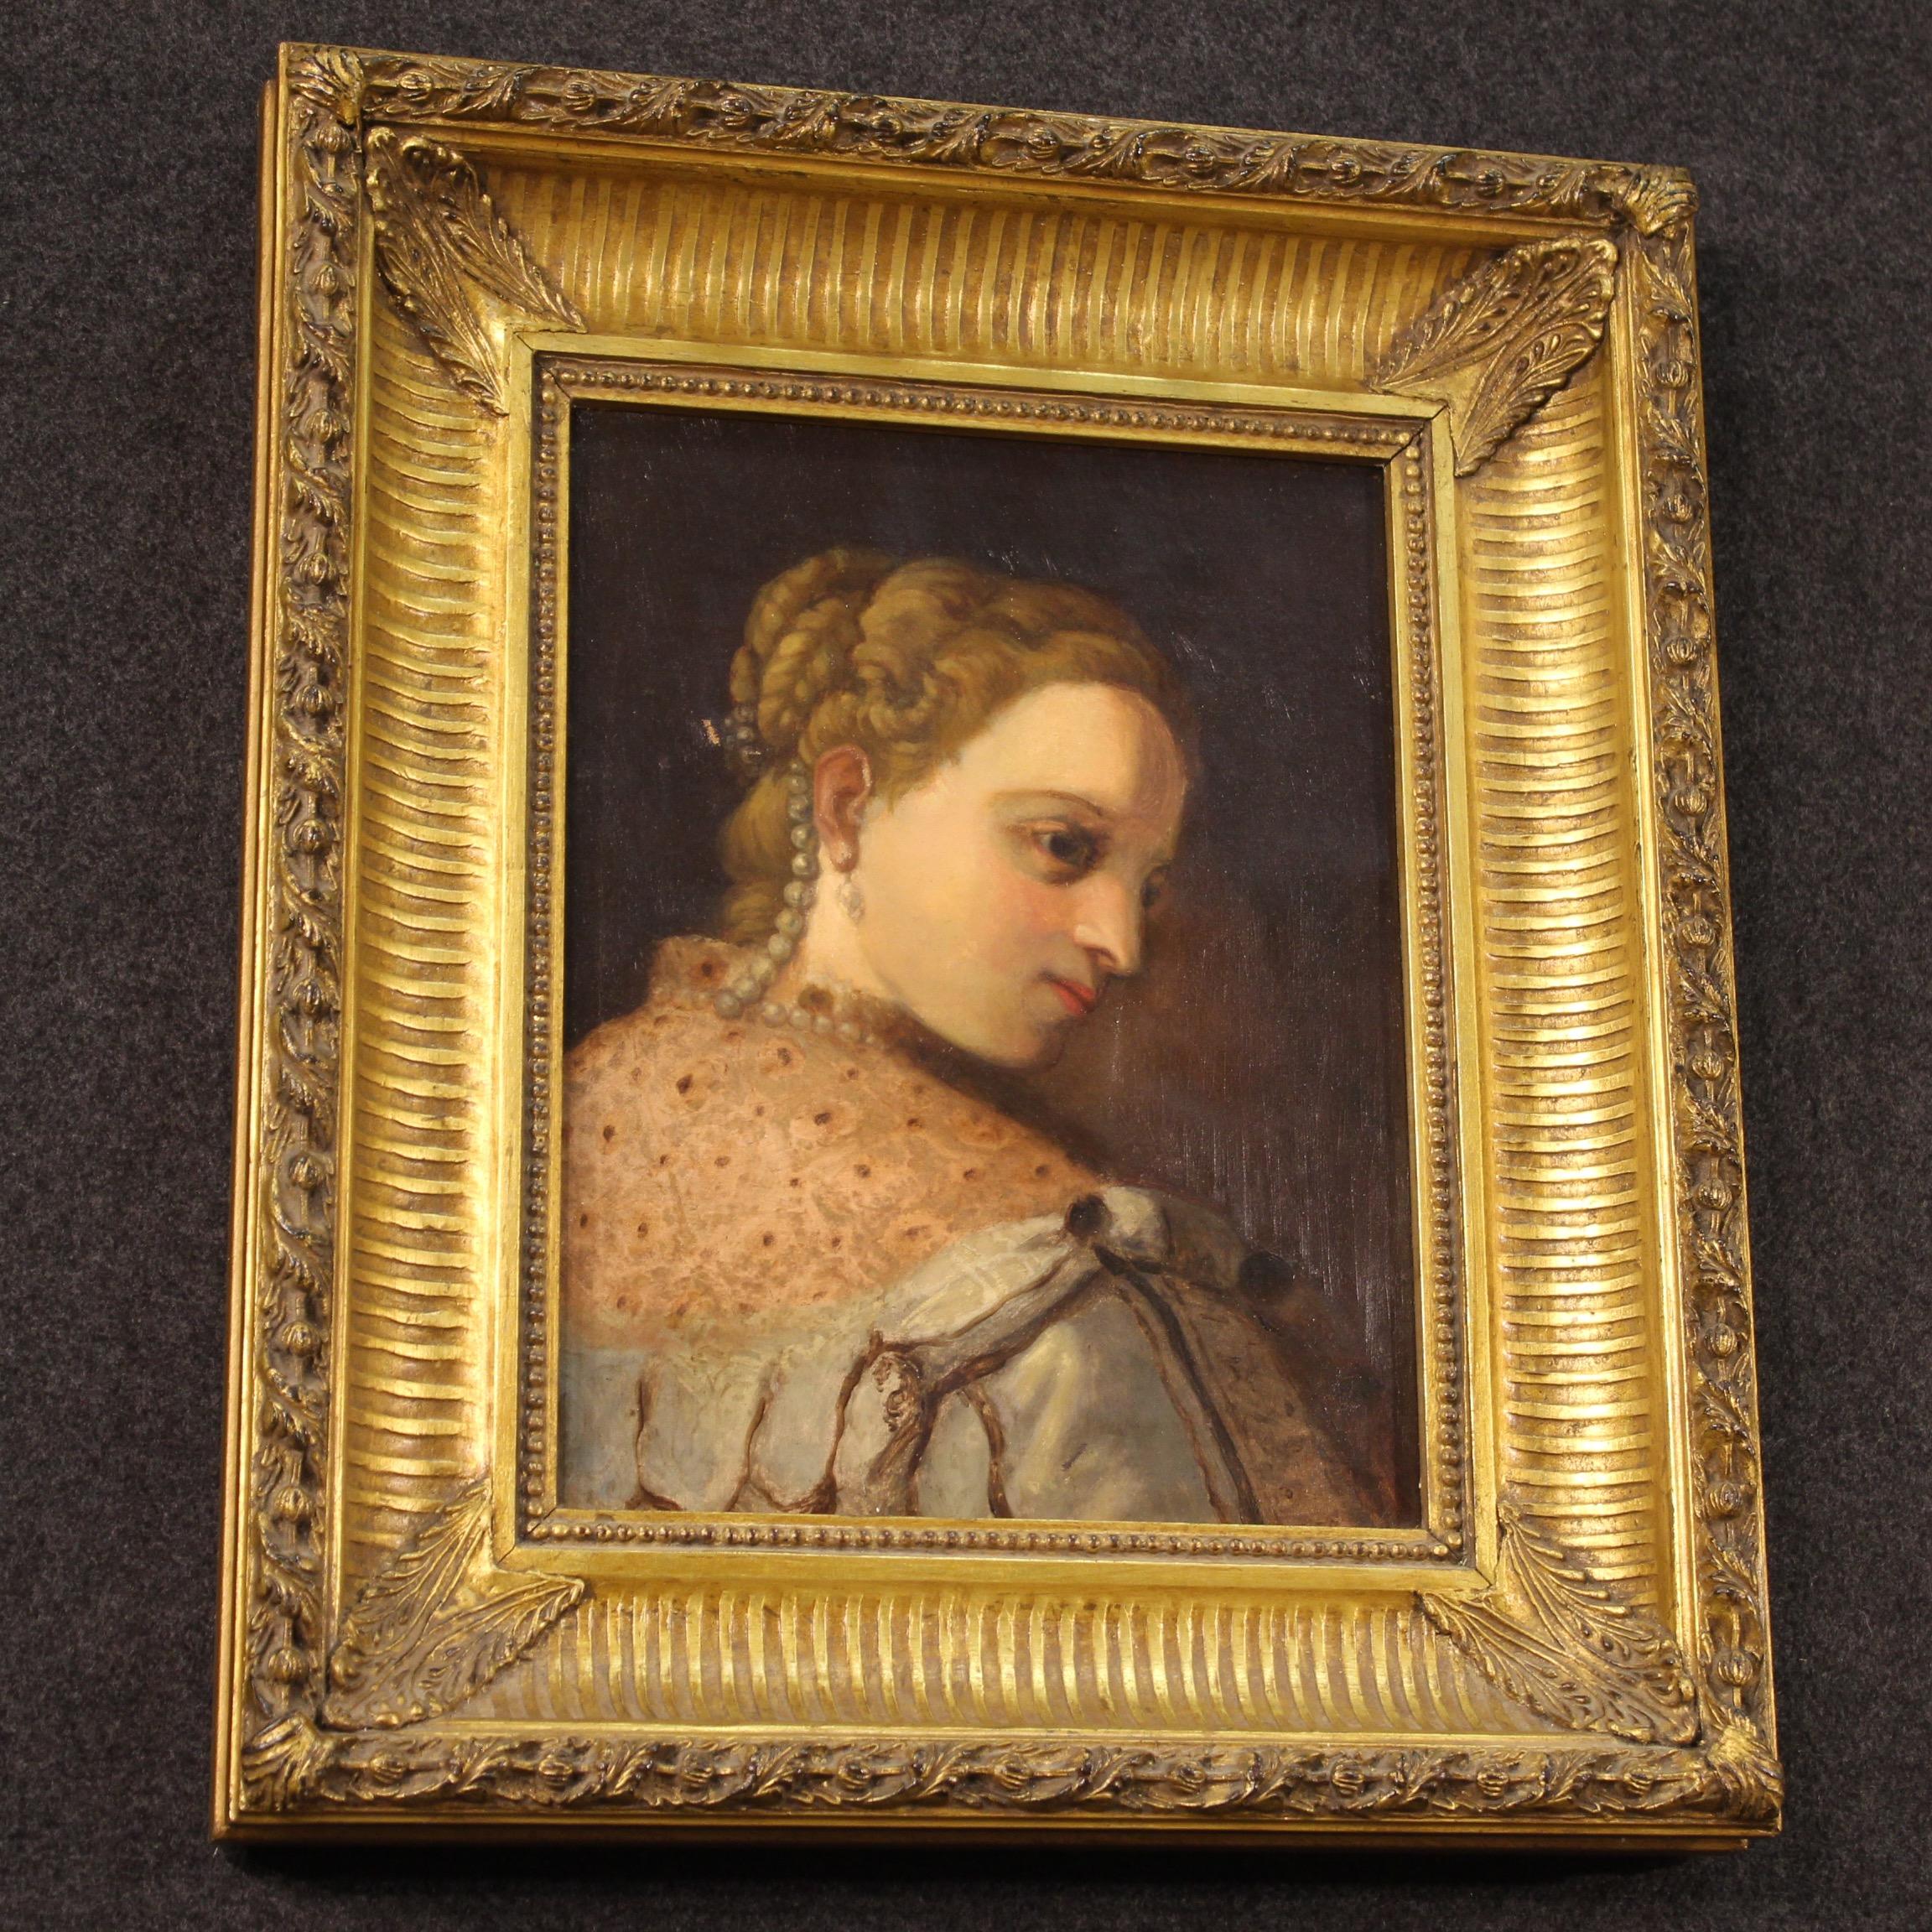 German painting from late 19th century. Framework oil on canvas depicting a copy of a famous painting by Veronese, portrait of a young noblewoman of good pictorial quality. Modern frame in wood and plaster nicely carved and gilded. Painting that has